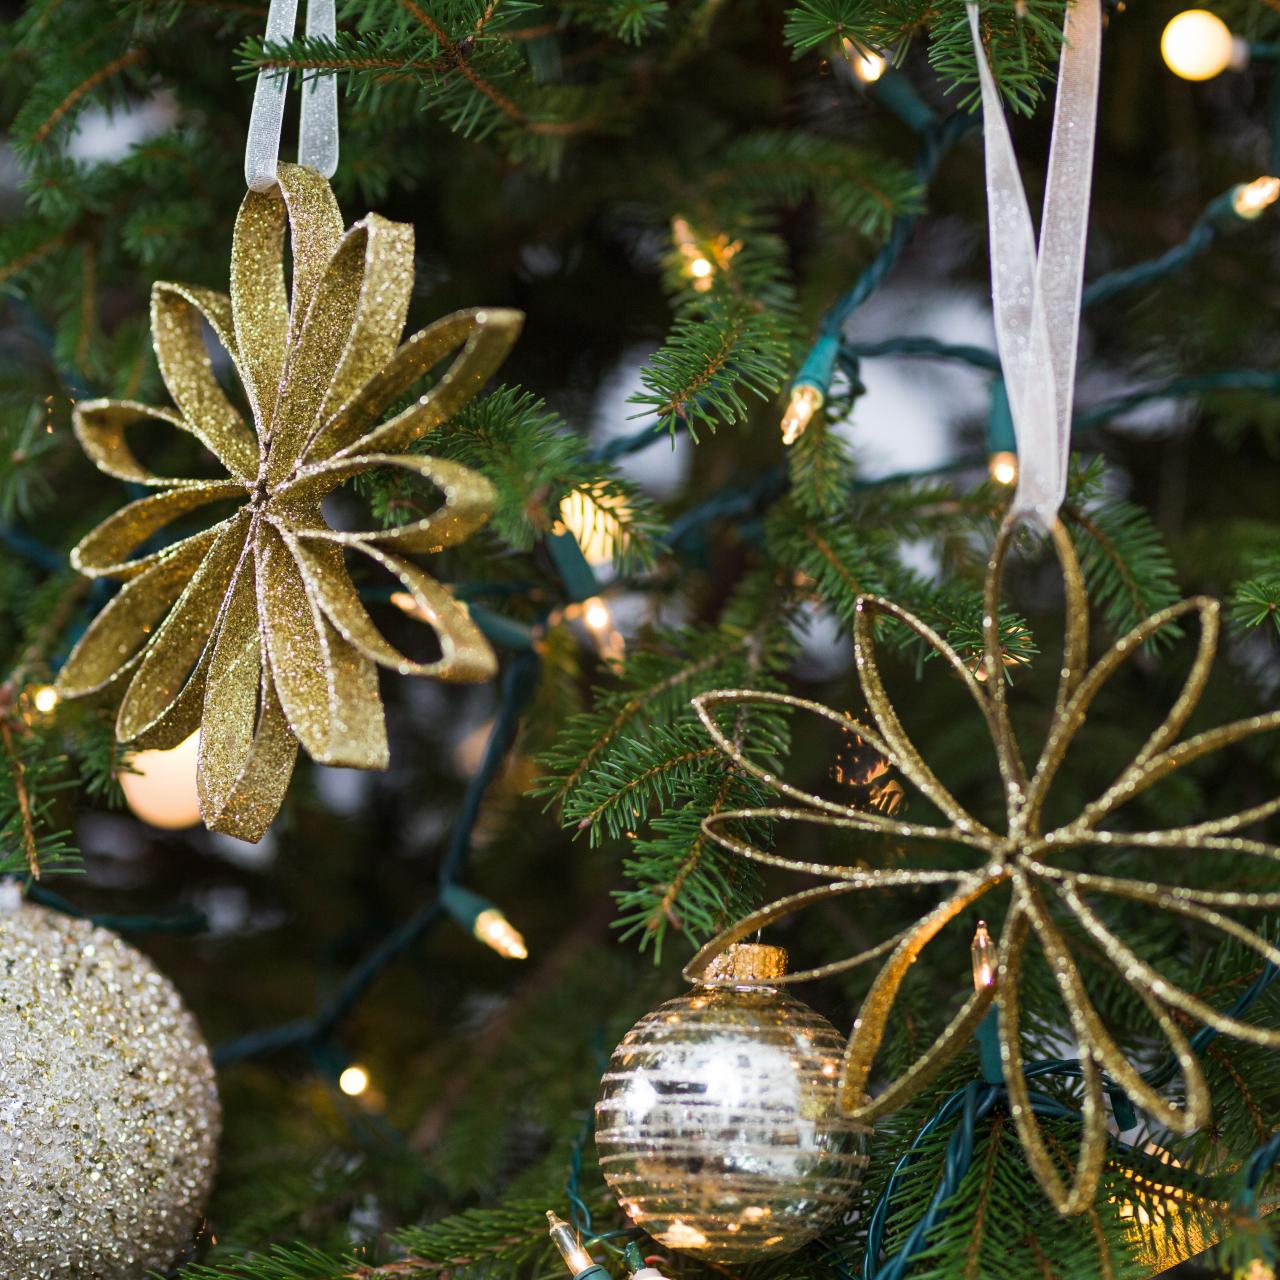 DIY These Top 50 Homemade Christmas Ornaments!